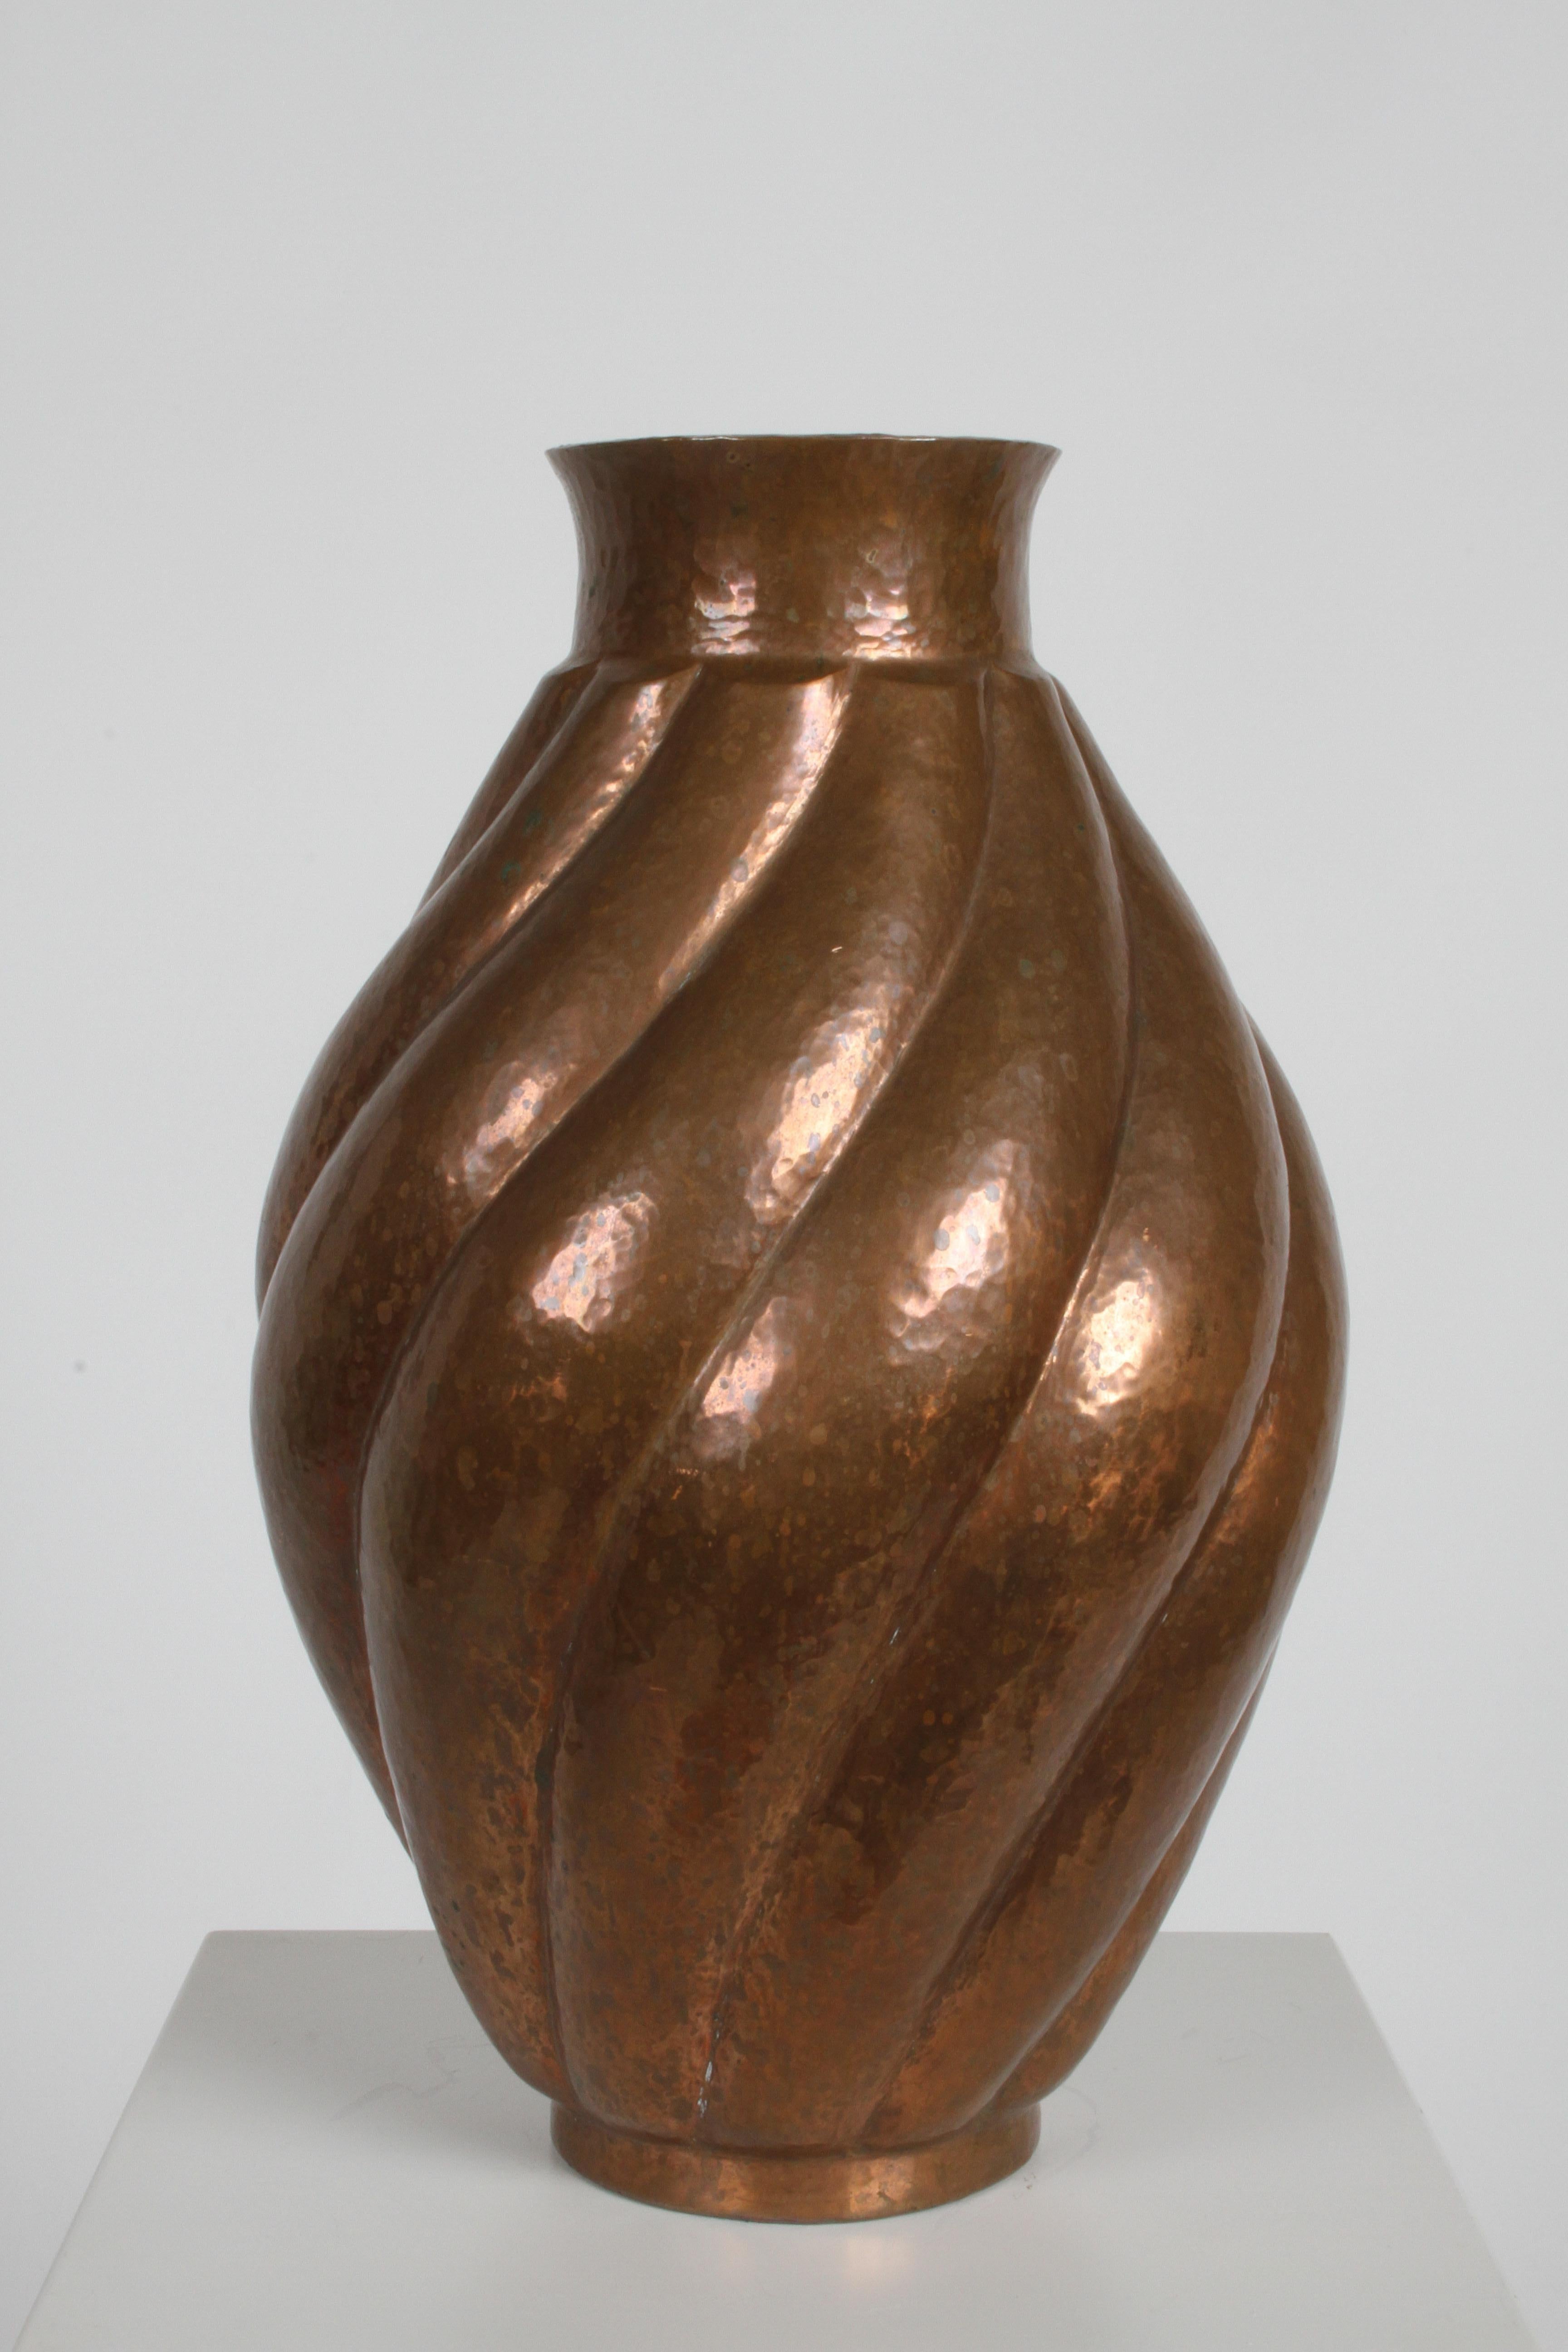 Substantial vintage large handwrought sculptural copper vase or vessel from Santa Clara del Cobre region in Mexico. Made by artisan hands and of heavy thick copper. Unmarked, but a true piece of art from a region known for its coppersmiths. Nice